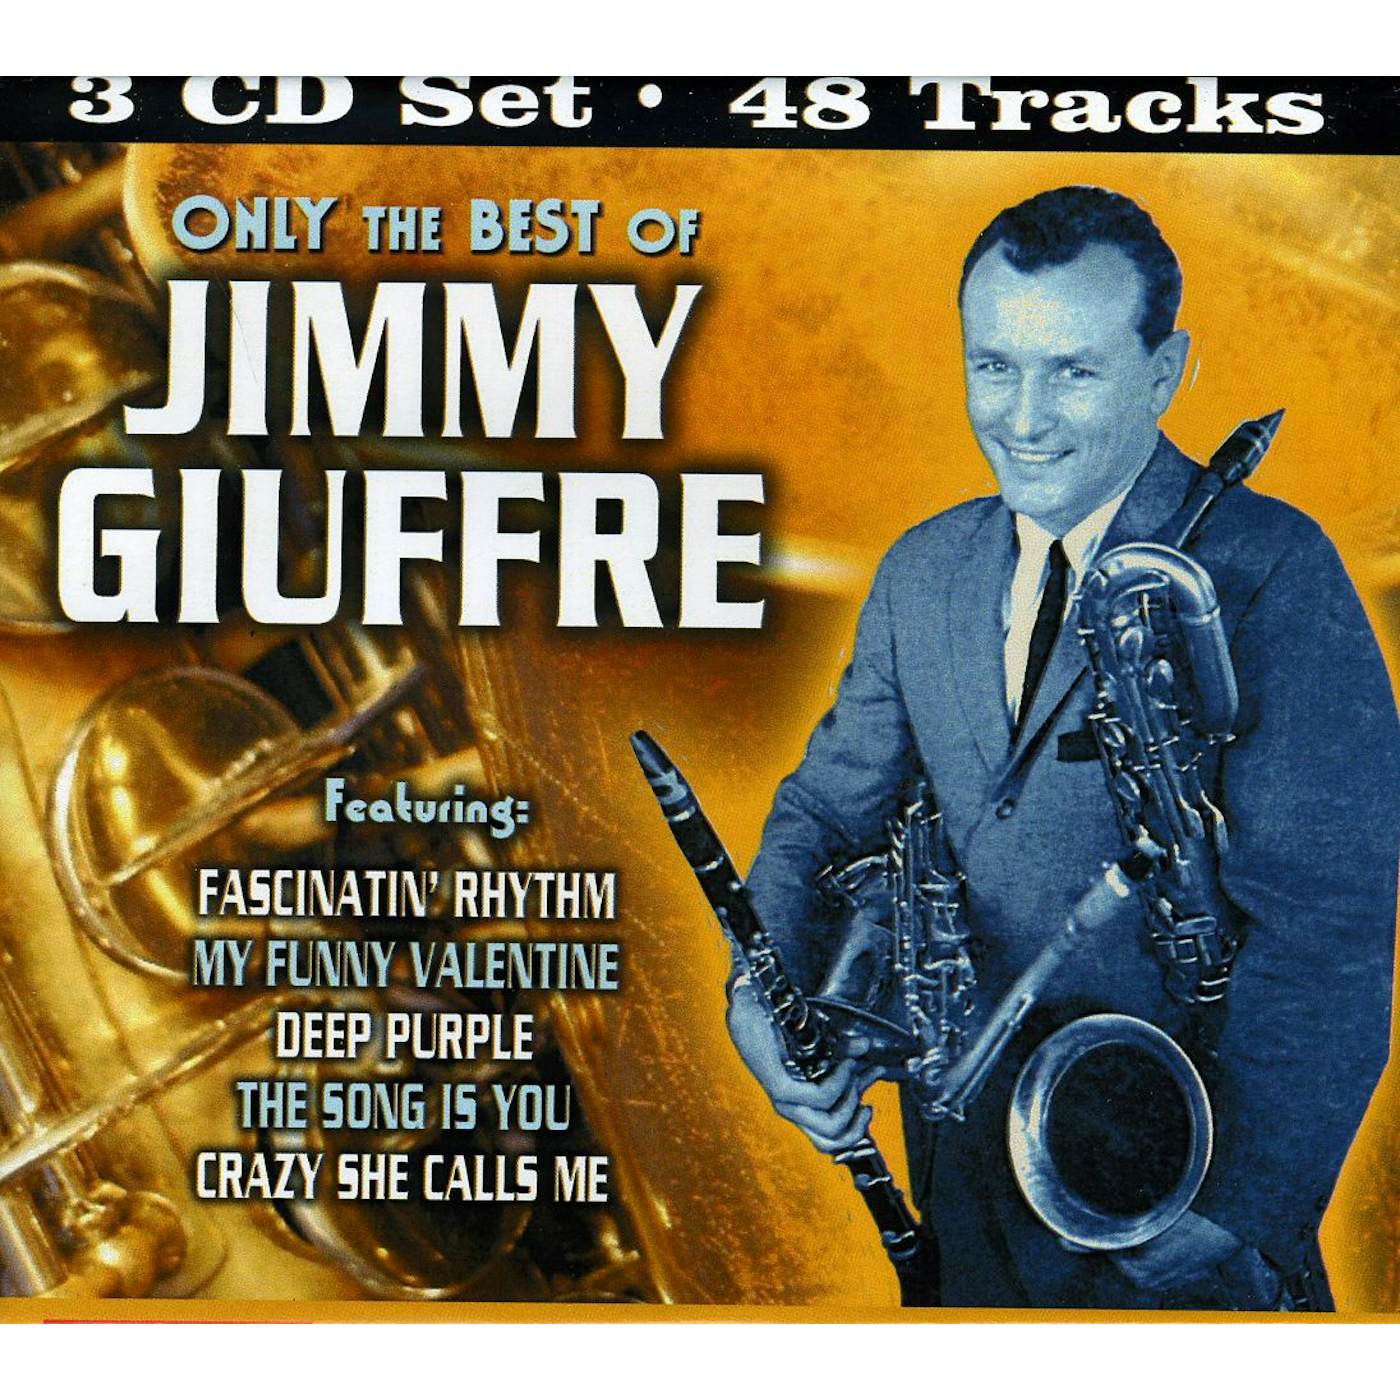 ONLY THE BEST OF JIMMY GIUFFRE CD